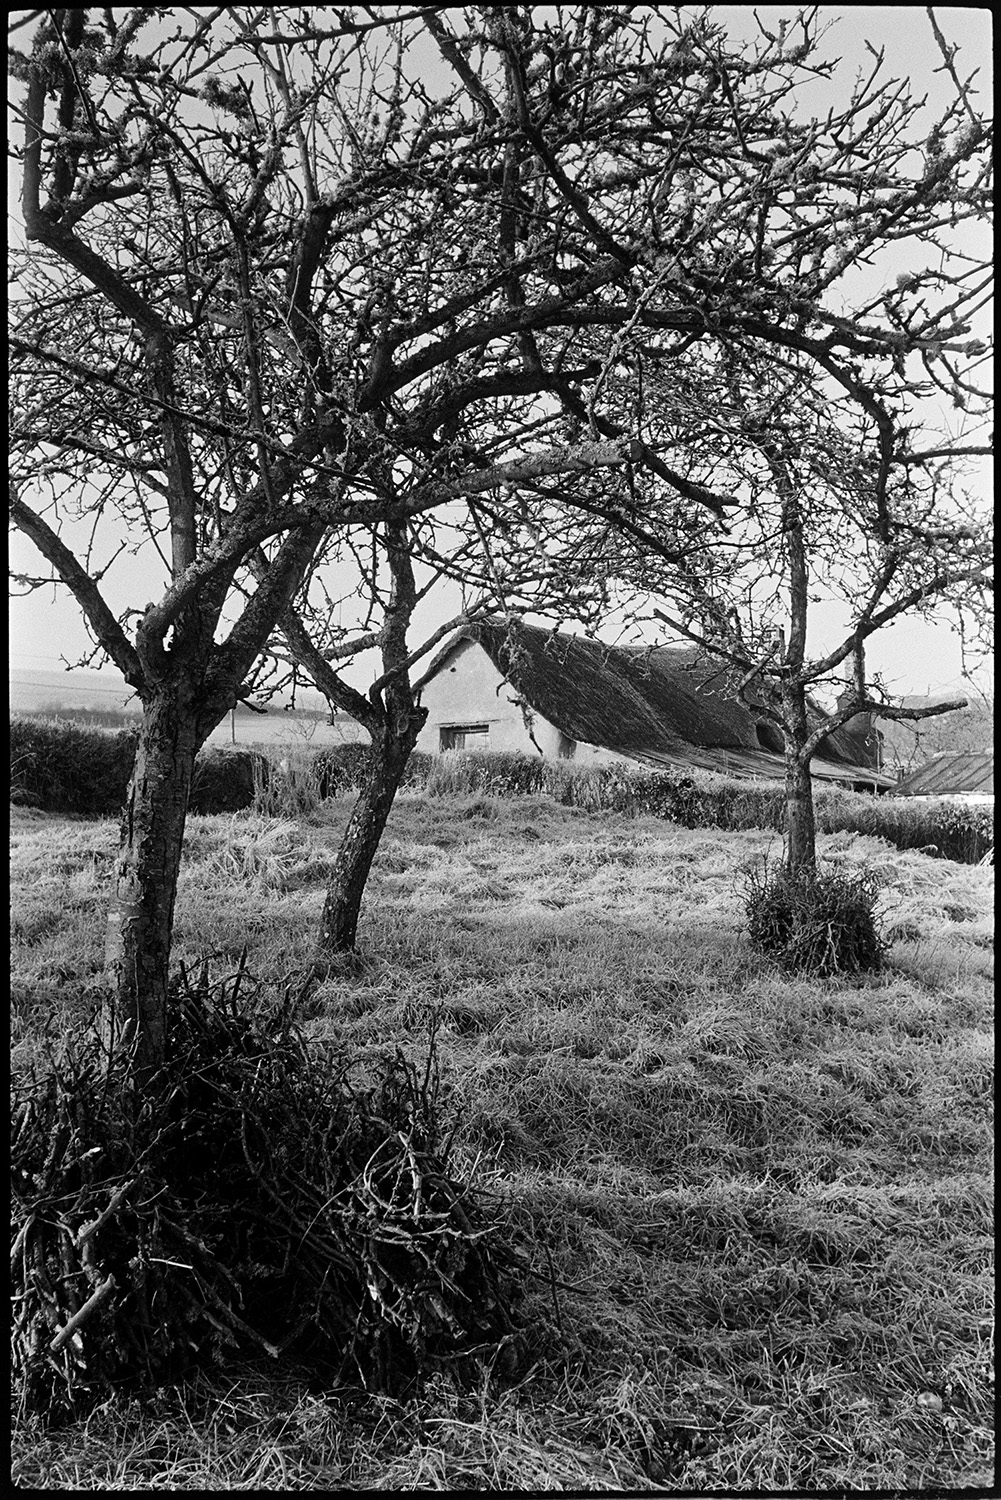 Orchards, prunings in bundle under tree. 
[Apple tree prunings piled around the trunks of trees in an orchard at Rashleigh Mill, Bridge Reeve. A cob and thatch farmhouse can be seen in the background.]